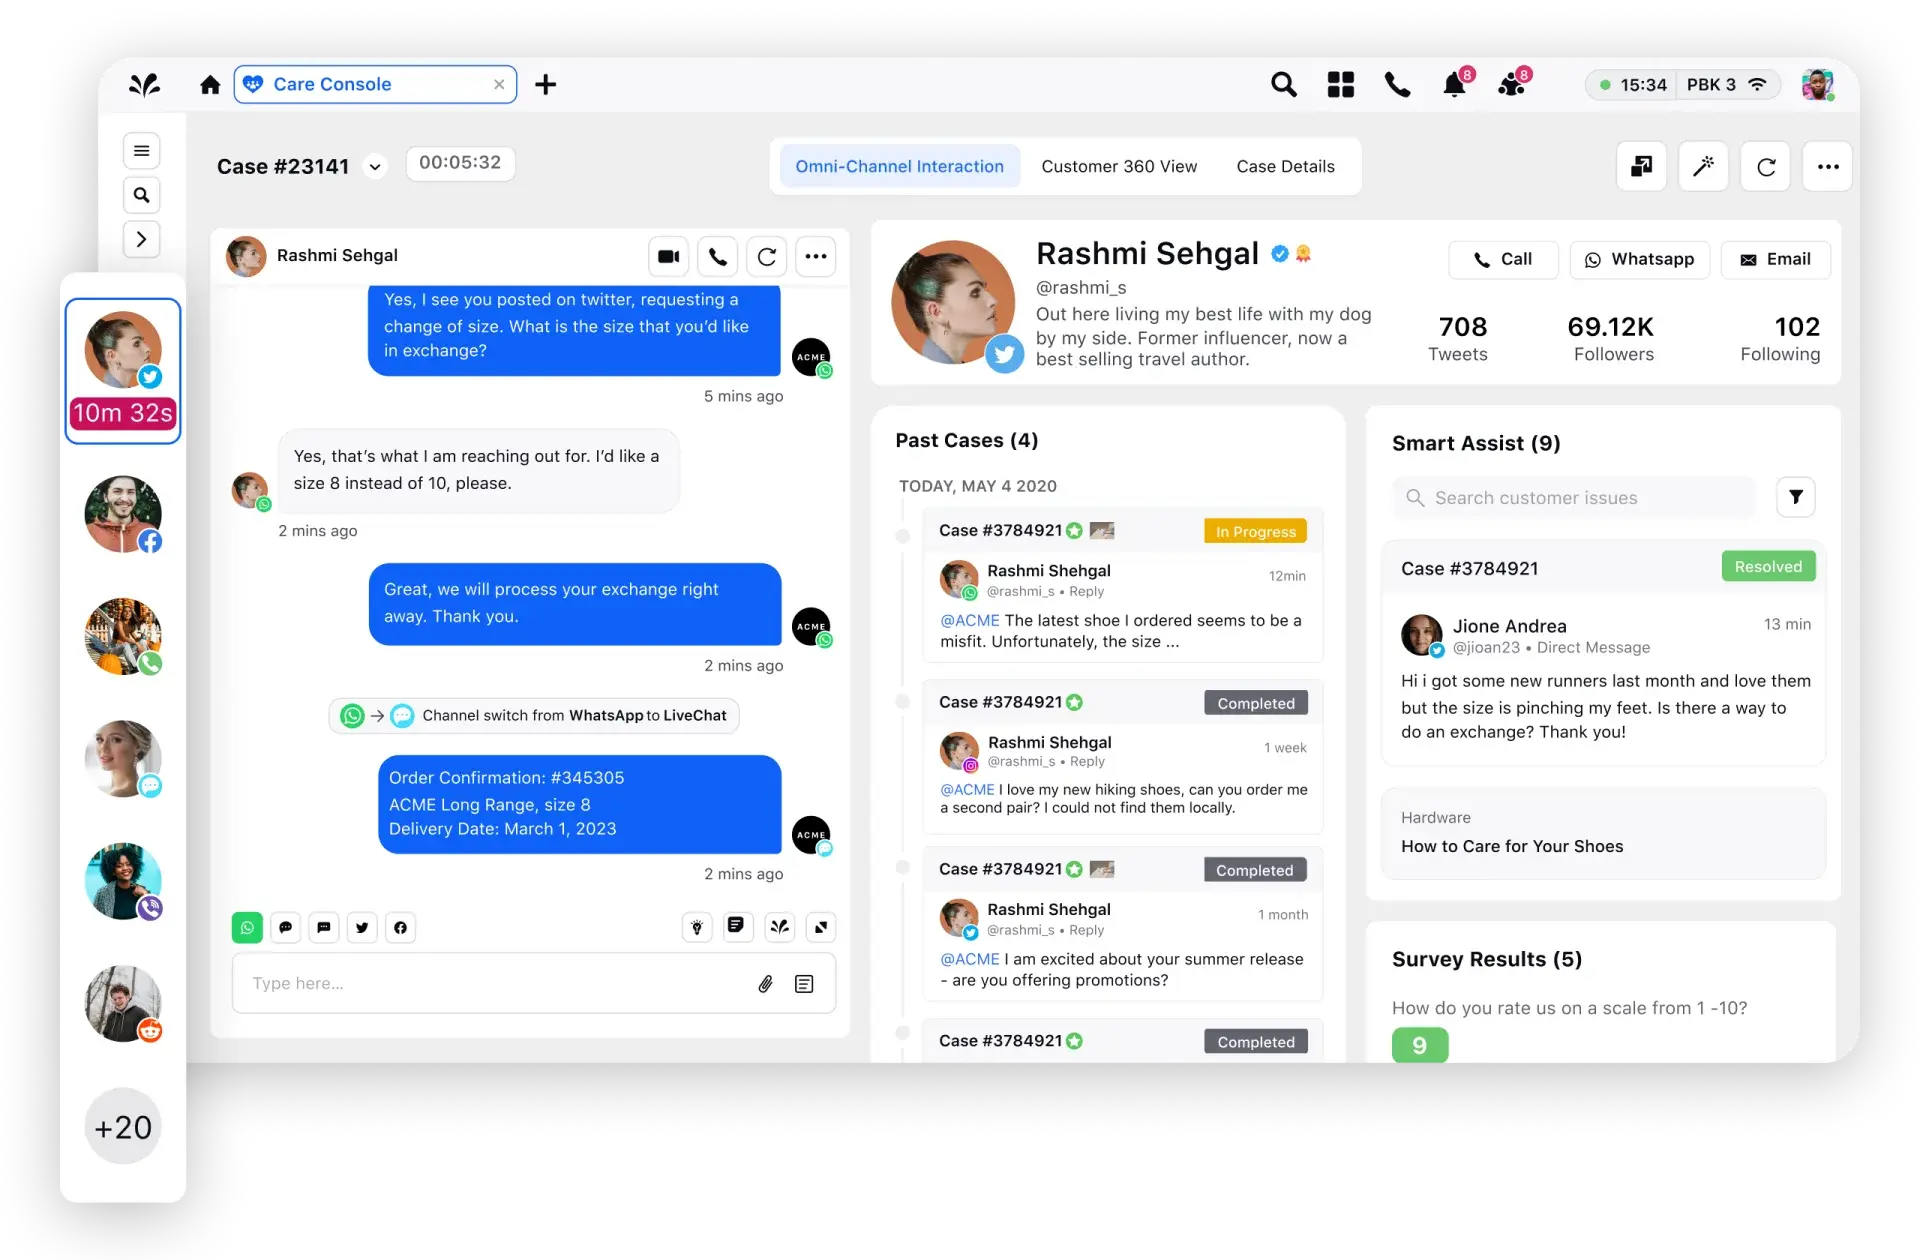 Unified view of customer conversation with Sprinklr social customer service software